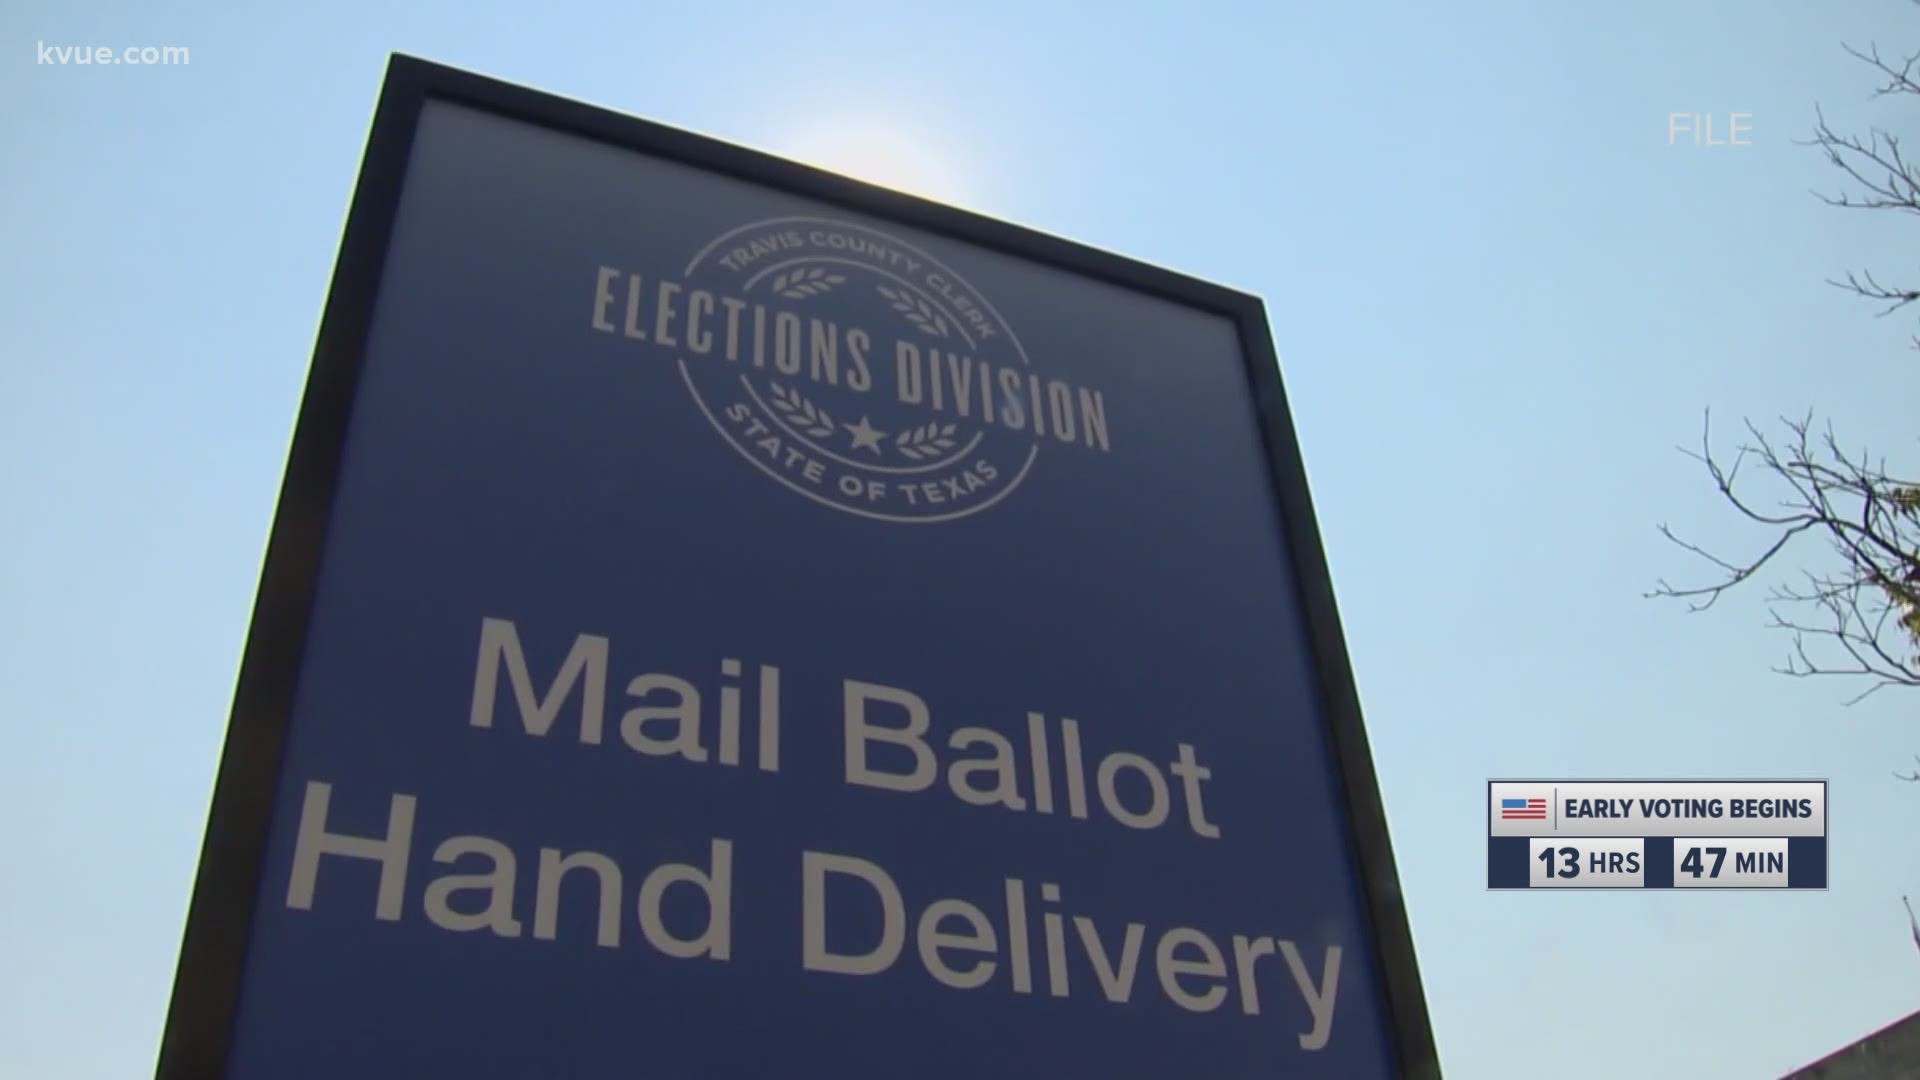 KVUE's Molly Oak gives the latest on mail-in ballot hand delivery and early voting locations.